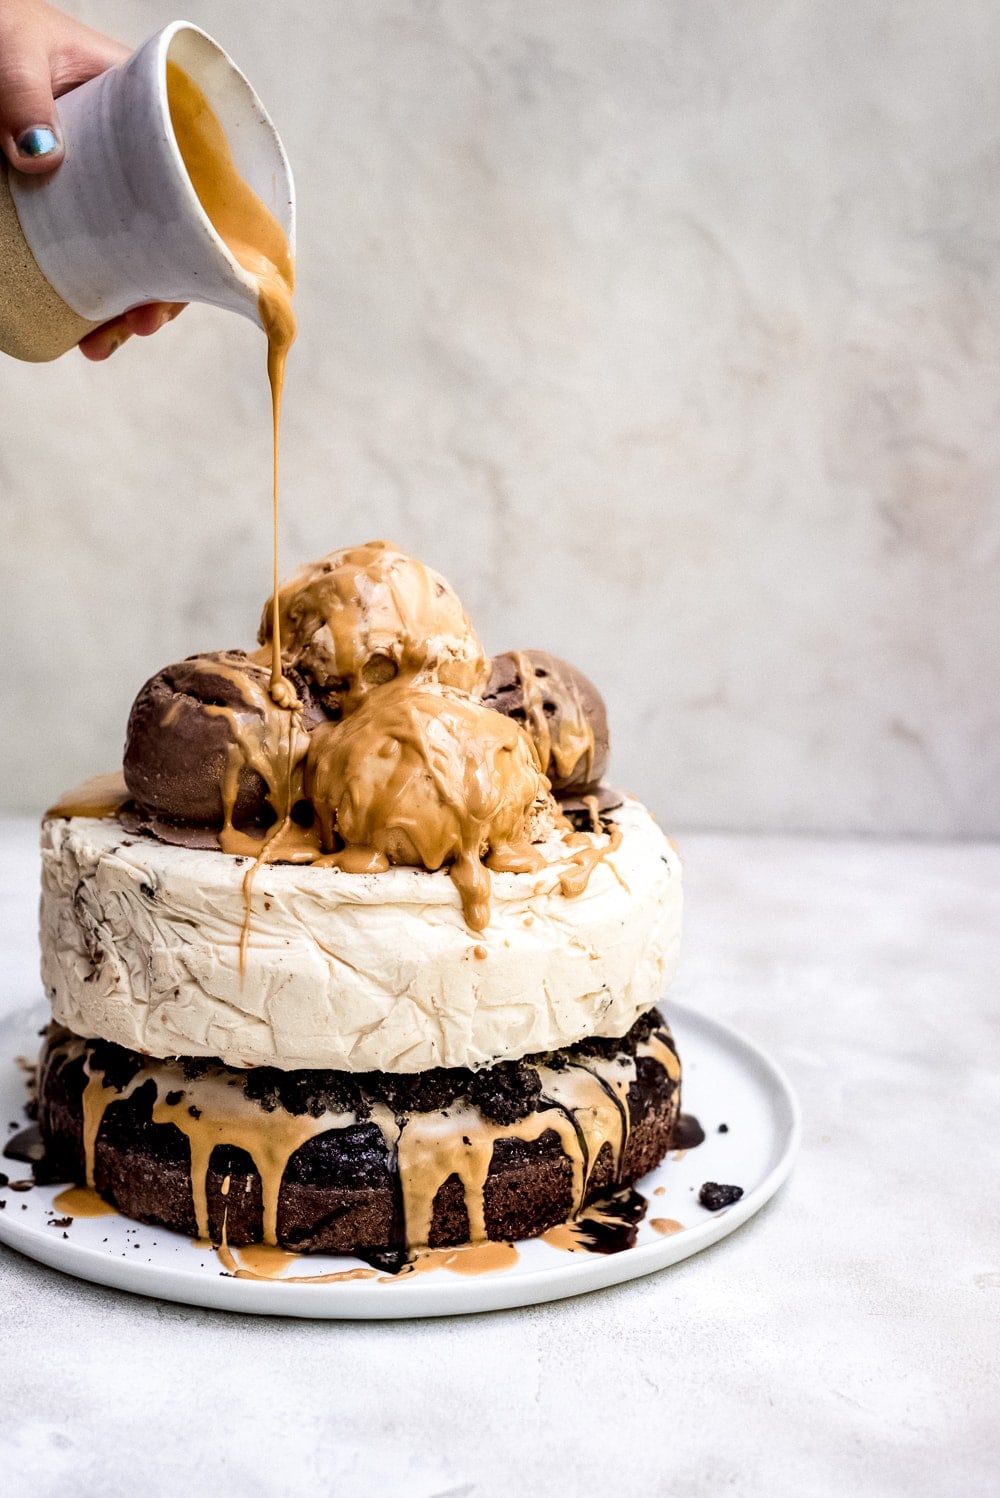 chocolate peanut butter ice cream cake being drizzled with peanut butter sauce